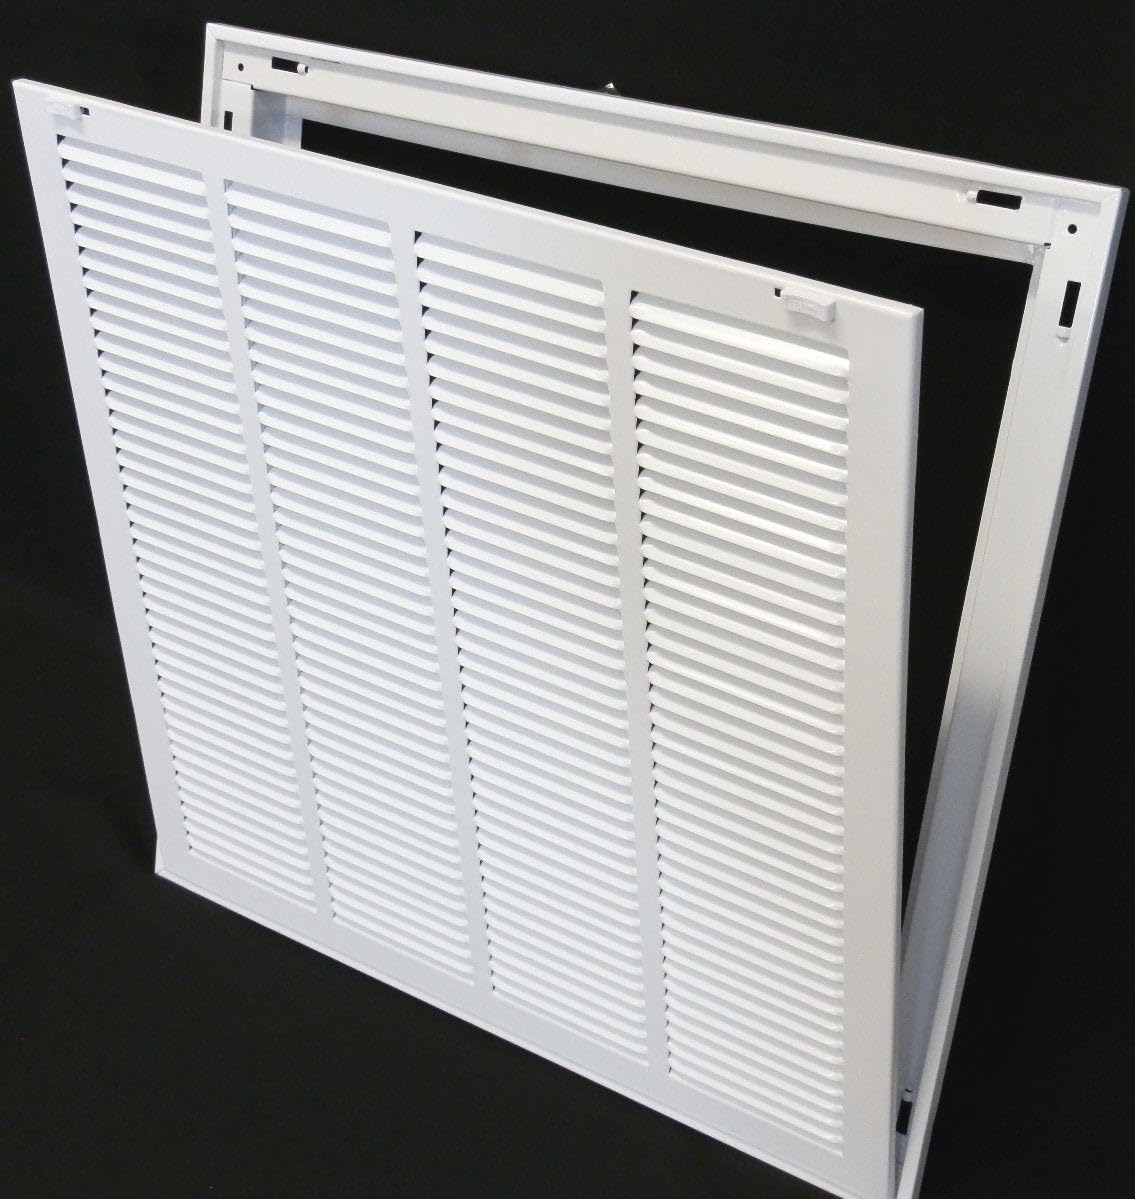 18&quot; X 24&quot; Steel Return Air Filter Grille for 1&quot; Filter - Removable Frame - [Outer Dimensions: 20 5/8&quot; X 26 5/8&quot;]